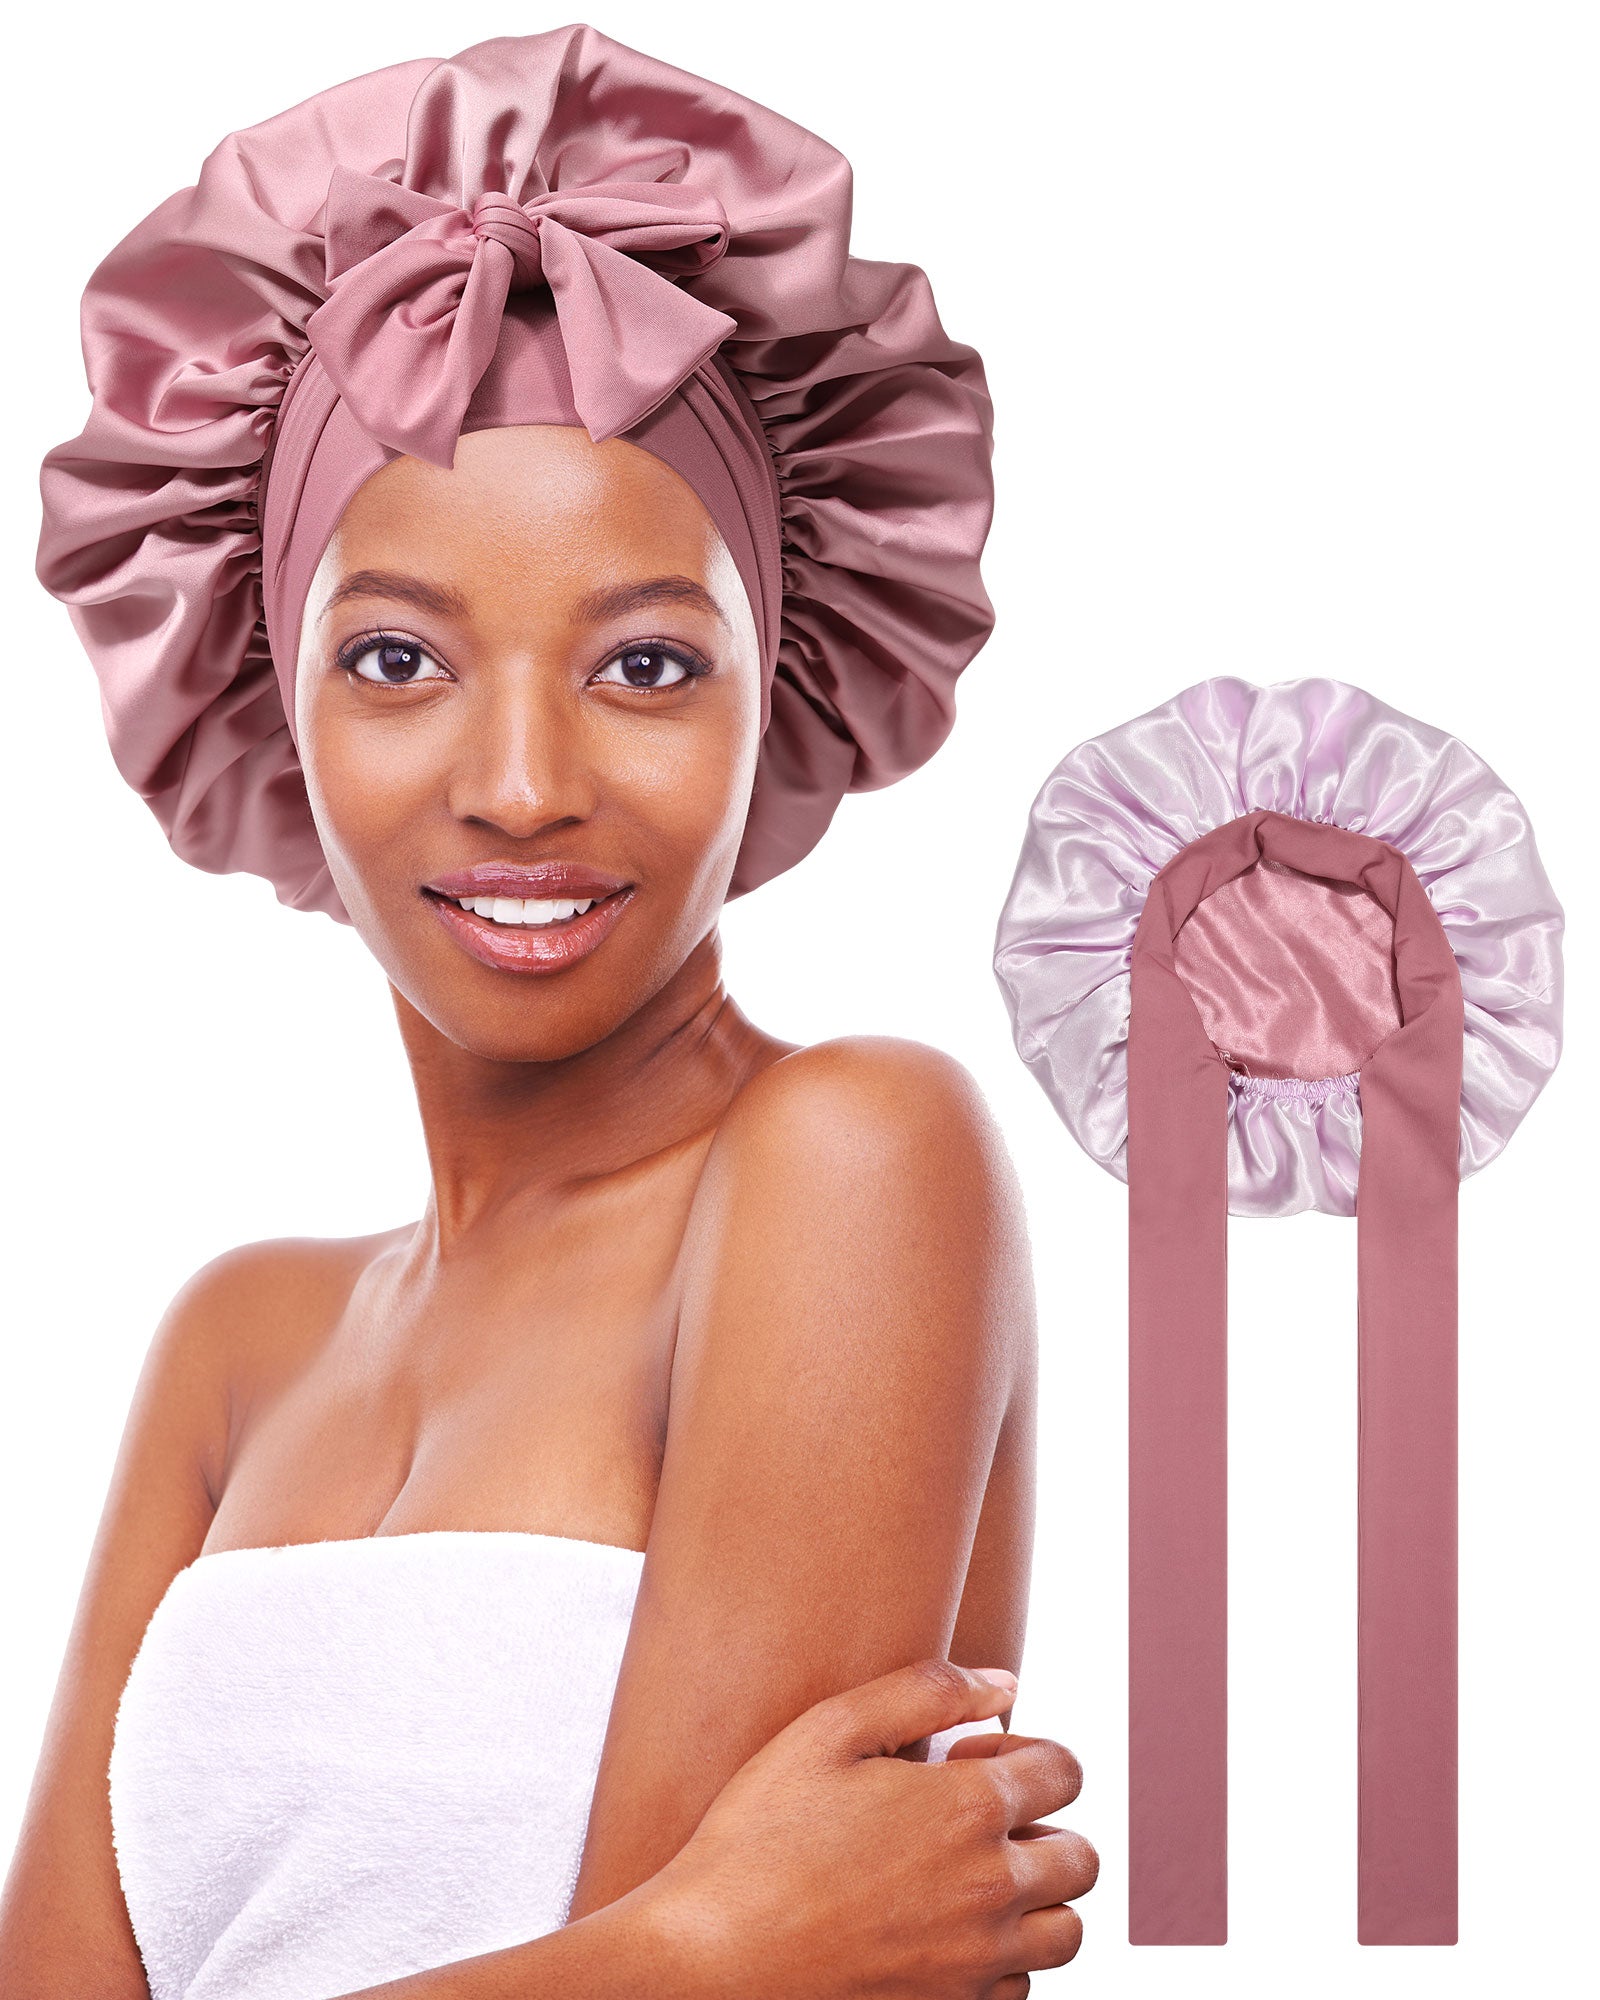 Satin Bonnet for Women Silk Bonnets for Sleeping Curly Hair Bonnet with Elastic Tie Band Reversible Double Layer Sleep Cap Hair Wrap (Double-Layer Reversible Satin Bonnet - Bean Paste + Pink)